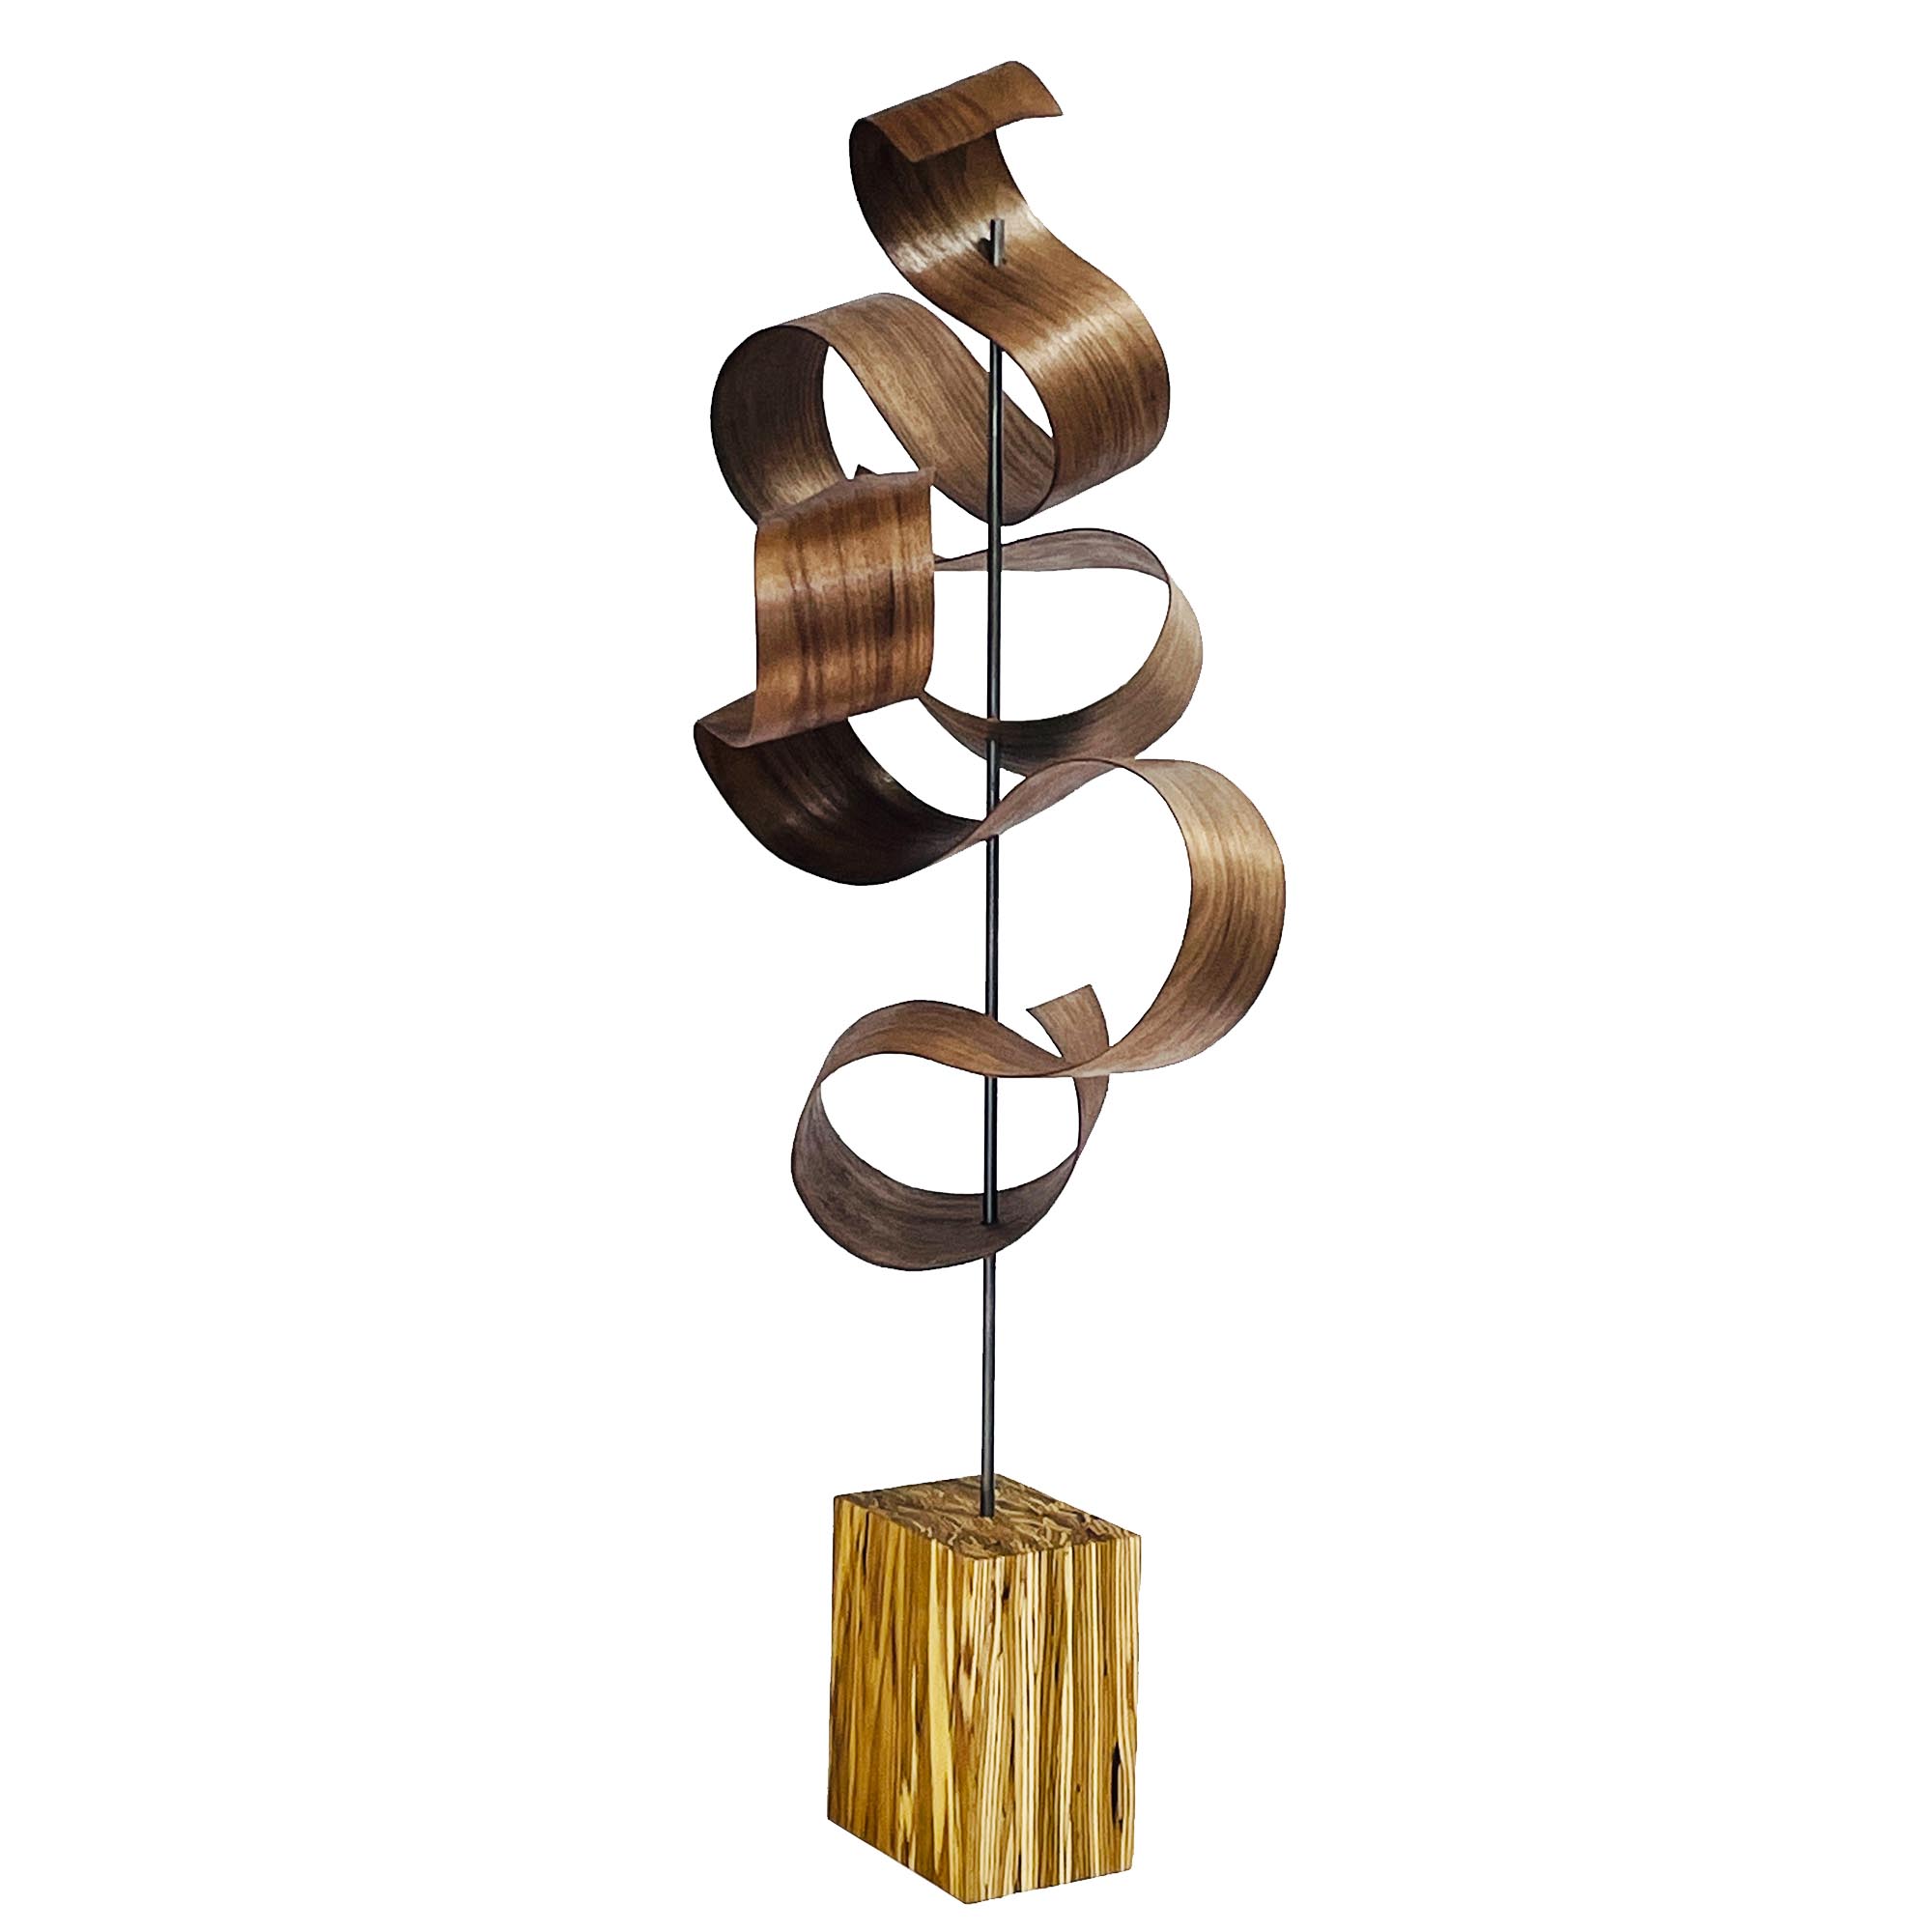 Wave Strand by Jackson Wright - Abstract Wood Sculpture, Kinetic Sculpture - Image 2